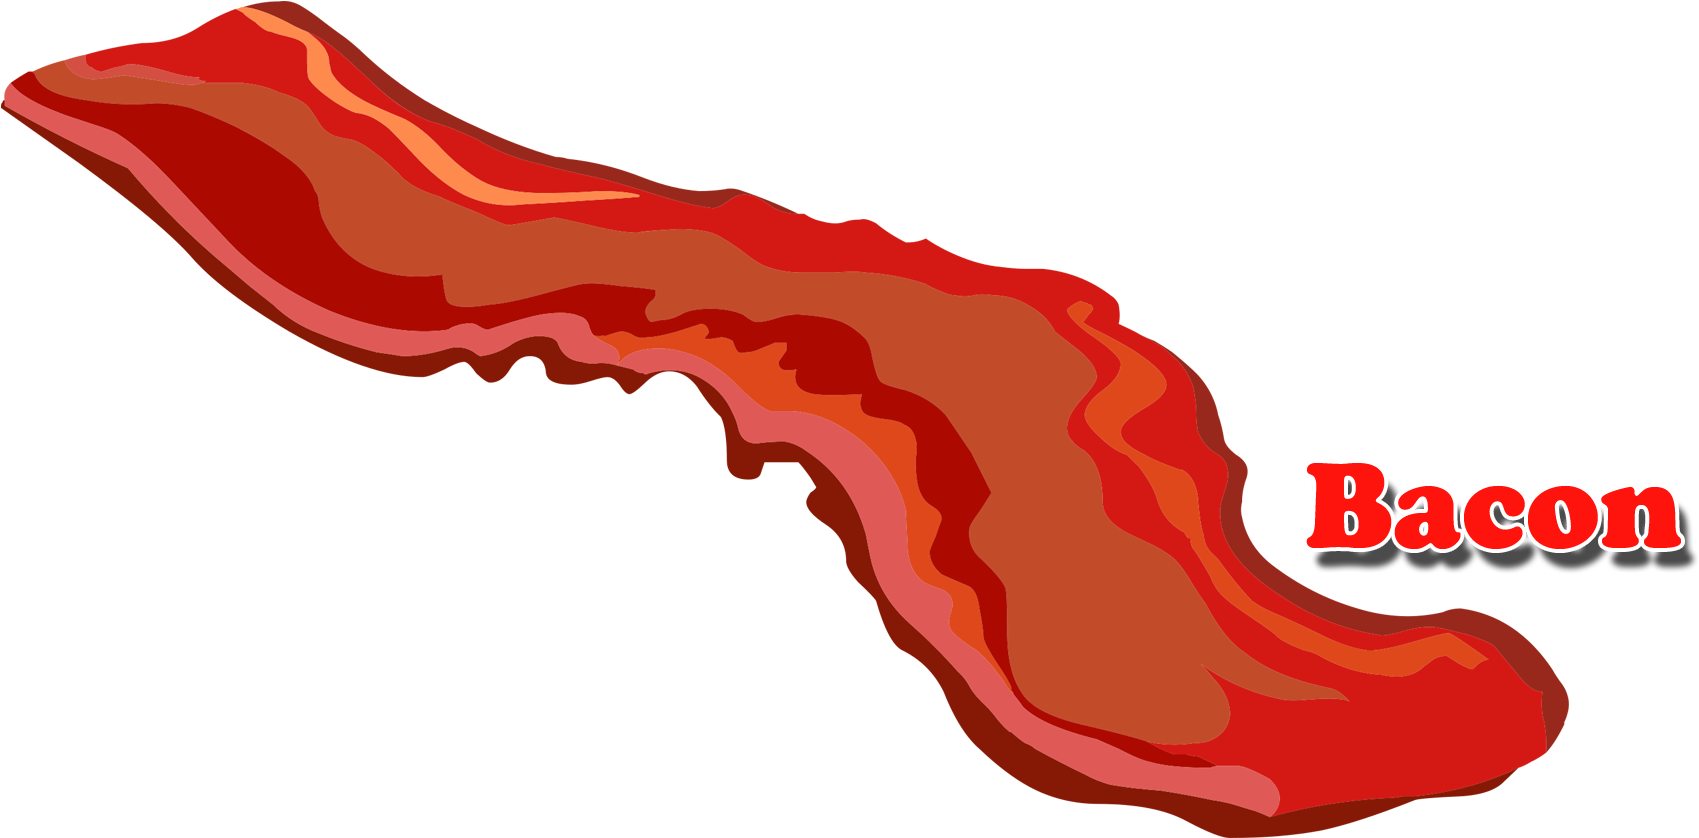 Stylized Bacon Graphic